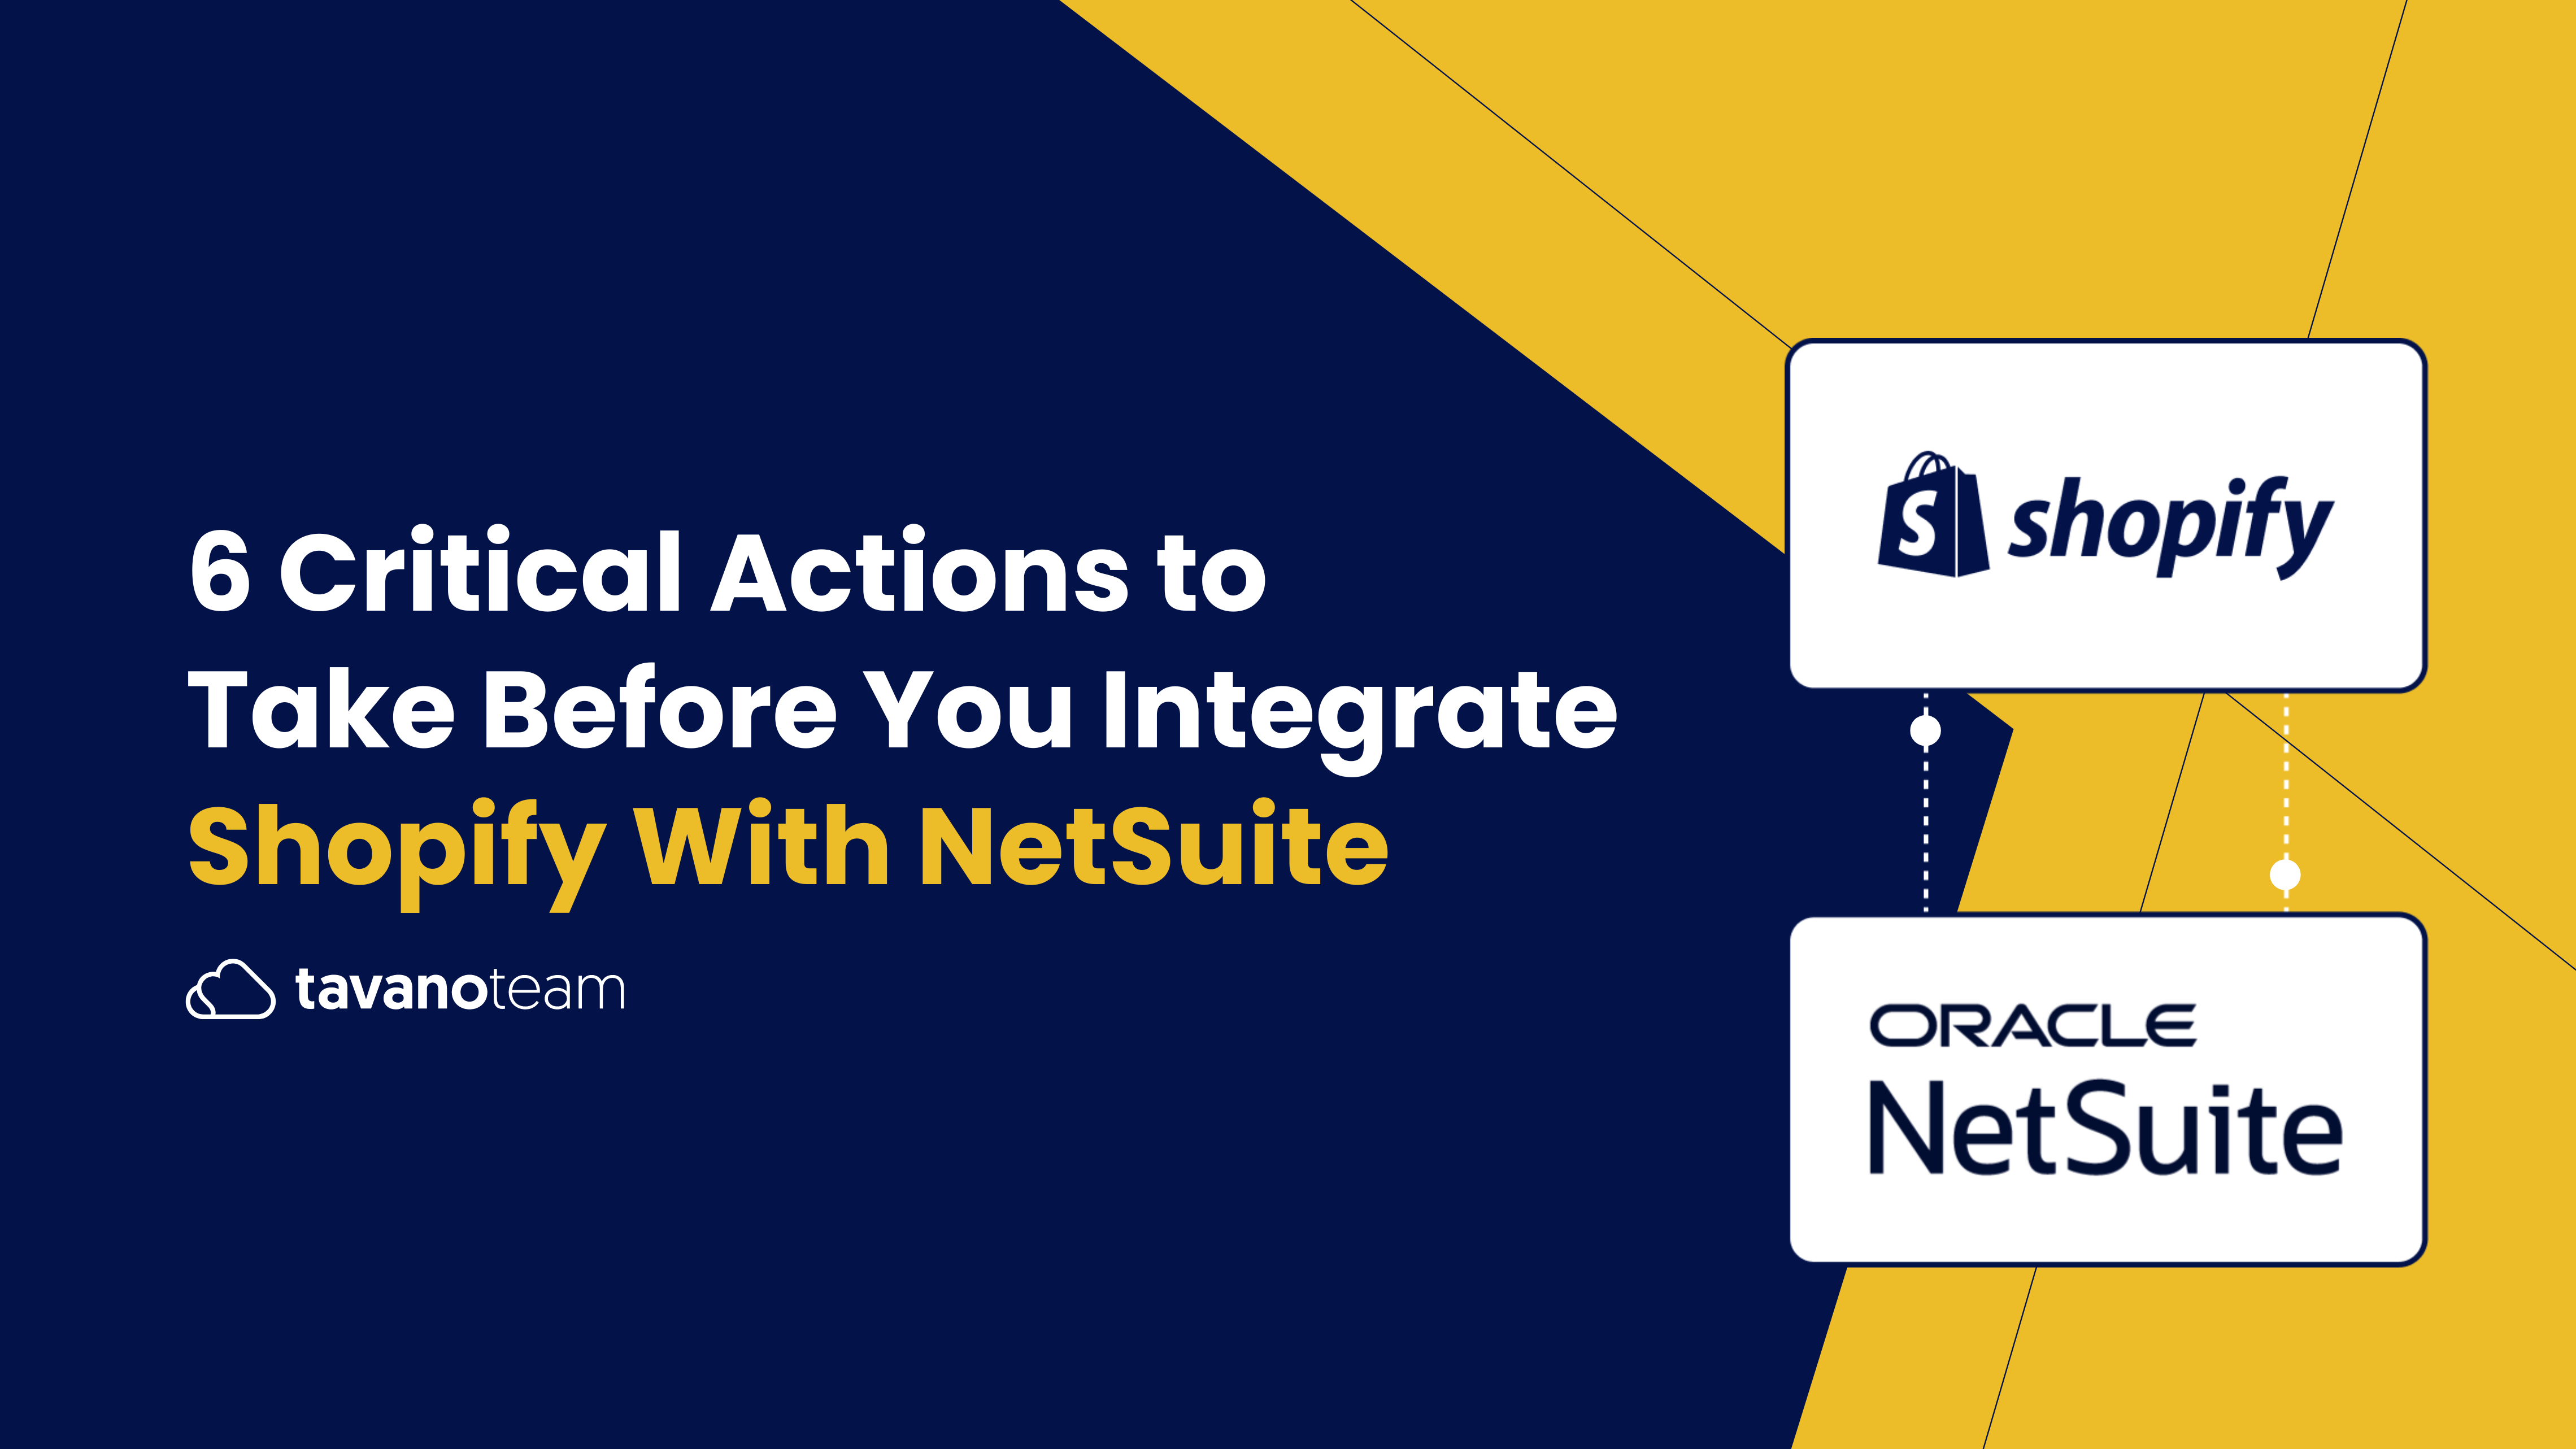 6-critical-actions-to-take-before-integrating-shopify-with-netsuite